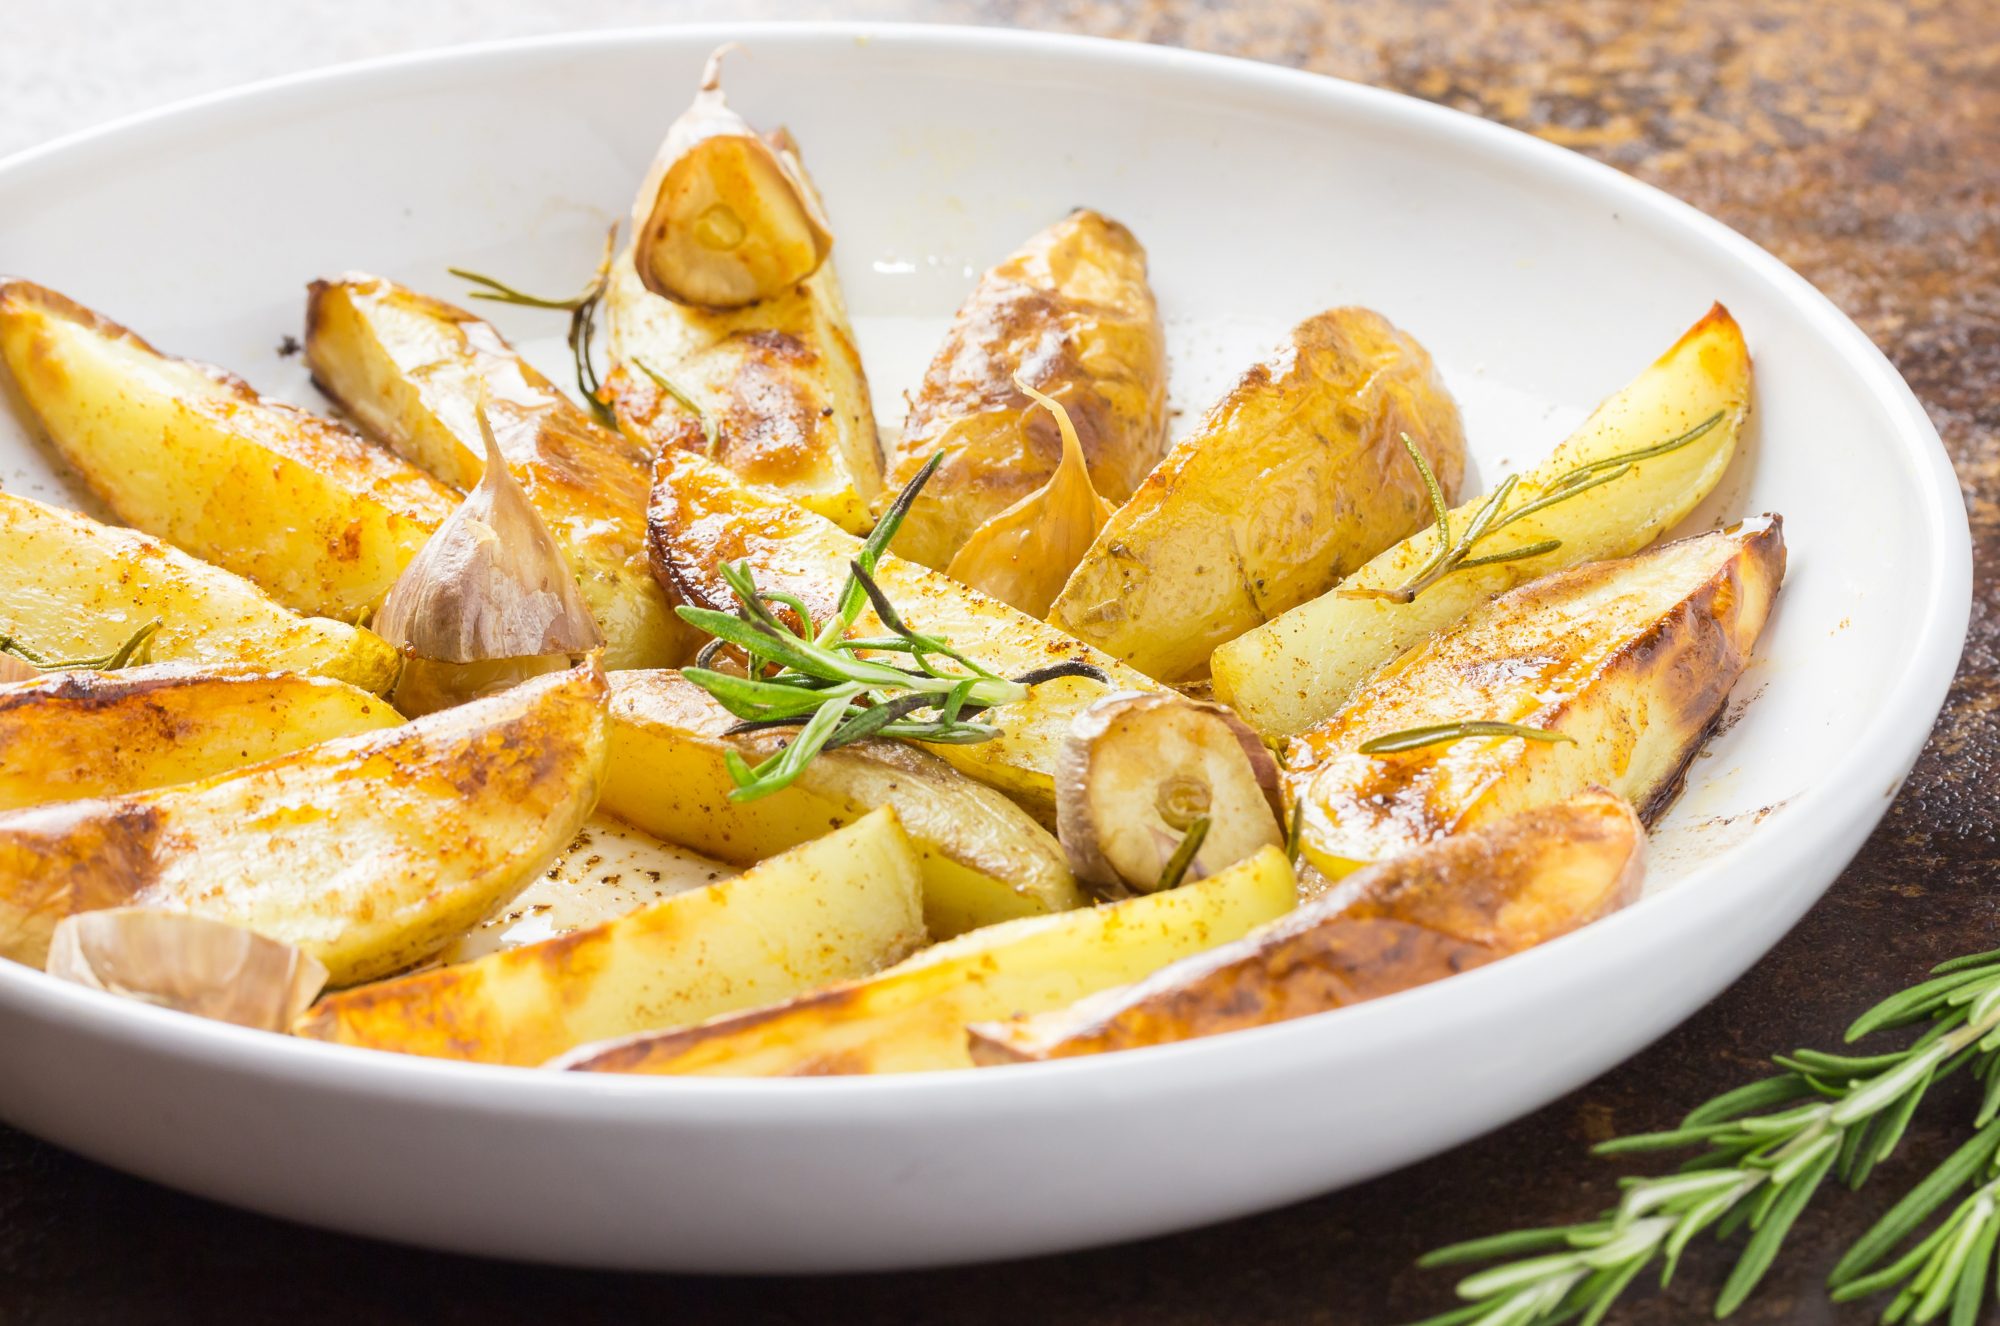 Roasted Fingerling Potatoes with Garlic & Herbs